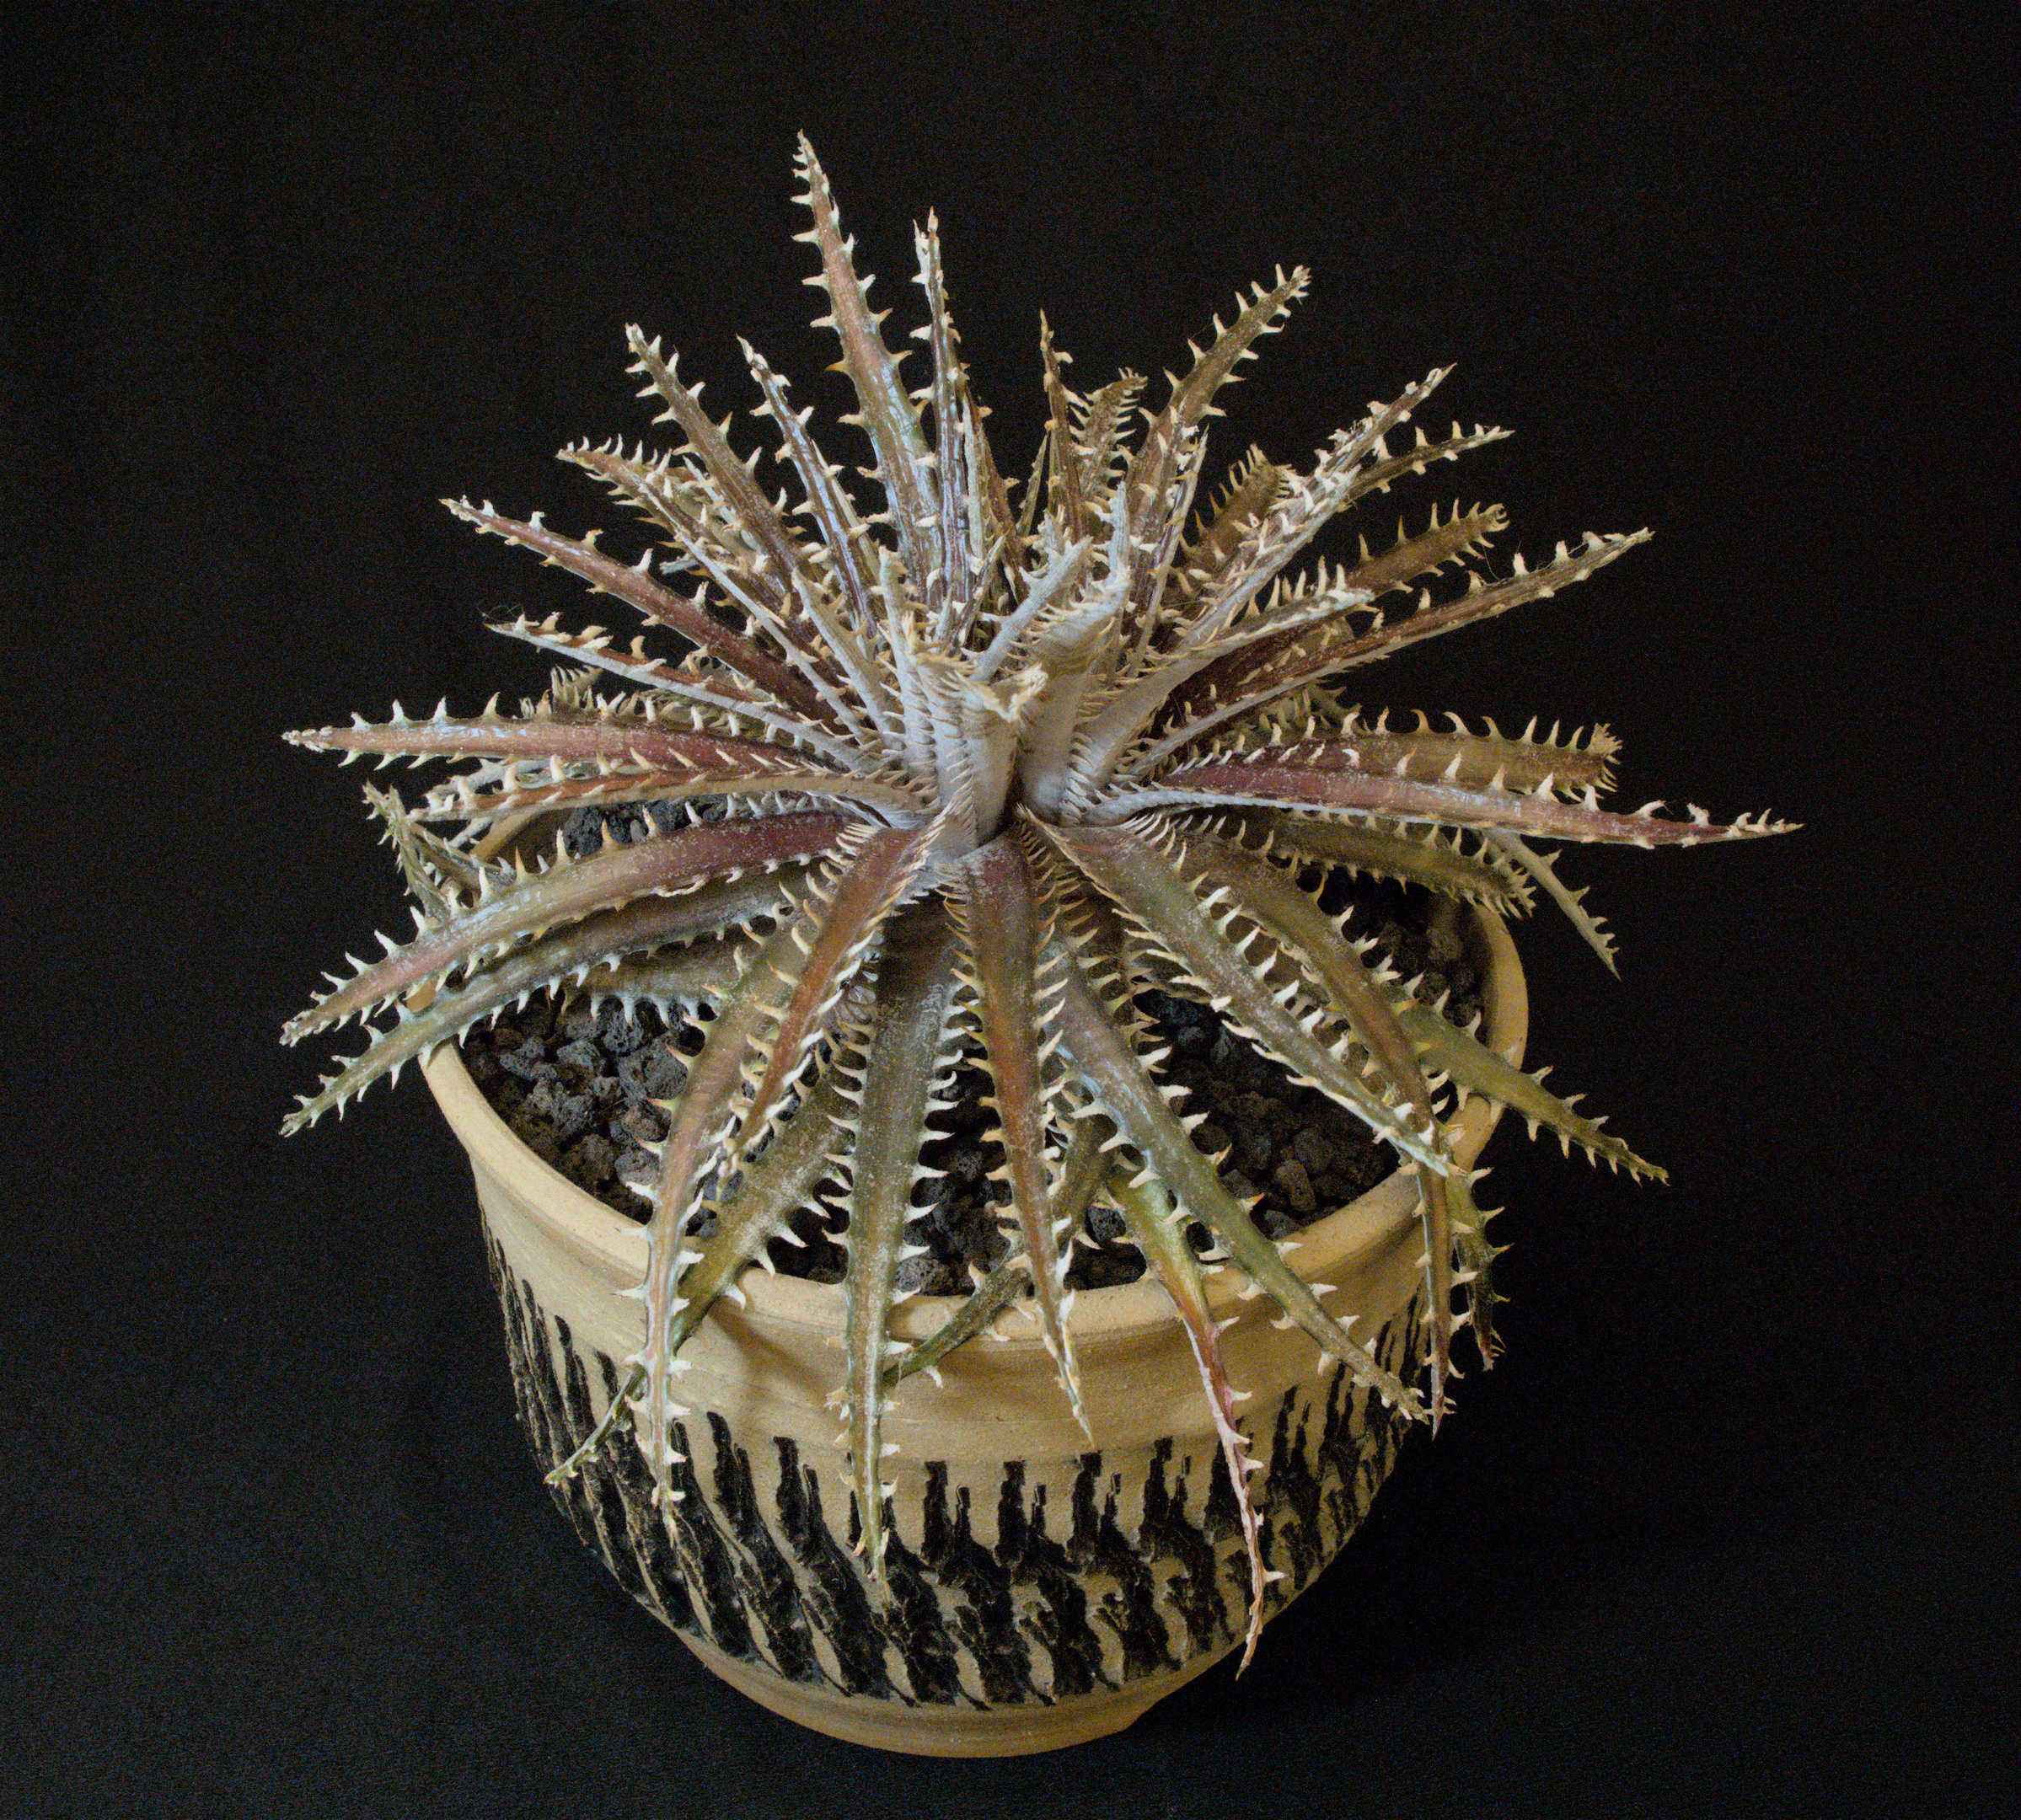 SCCSS 2022 August - Winner Open Succulent - Maria Capaldo - Dyckia 'White Whiskers' Hybrid